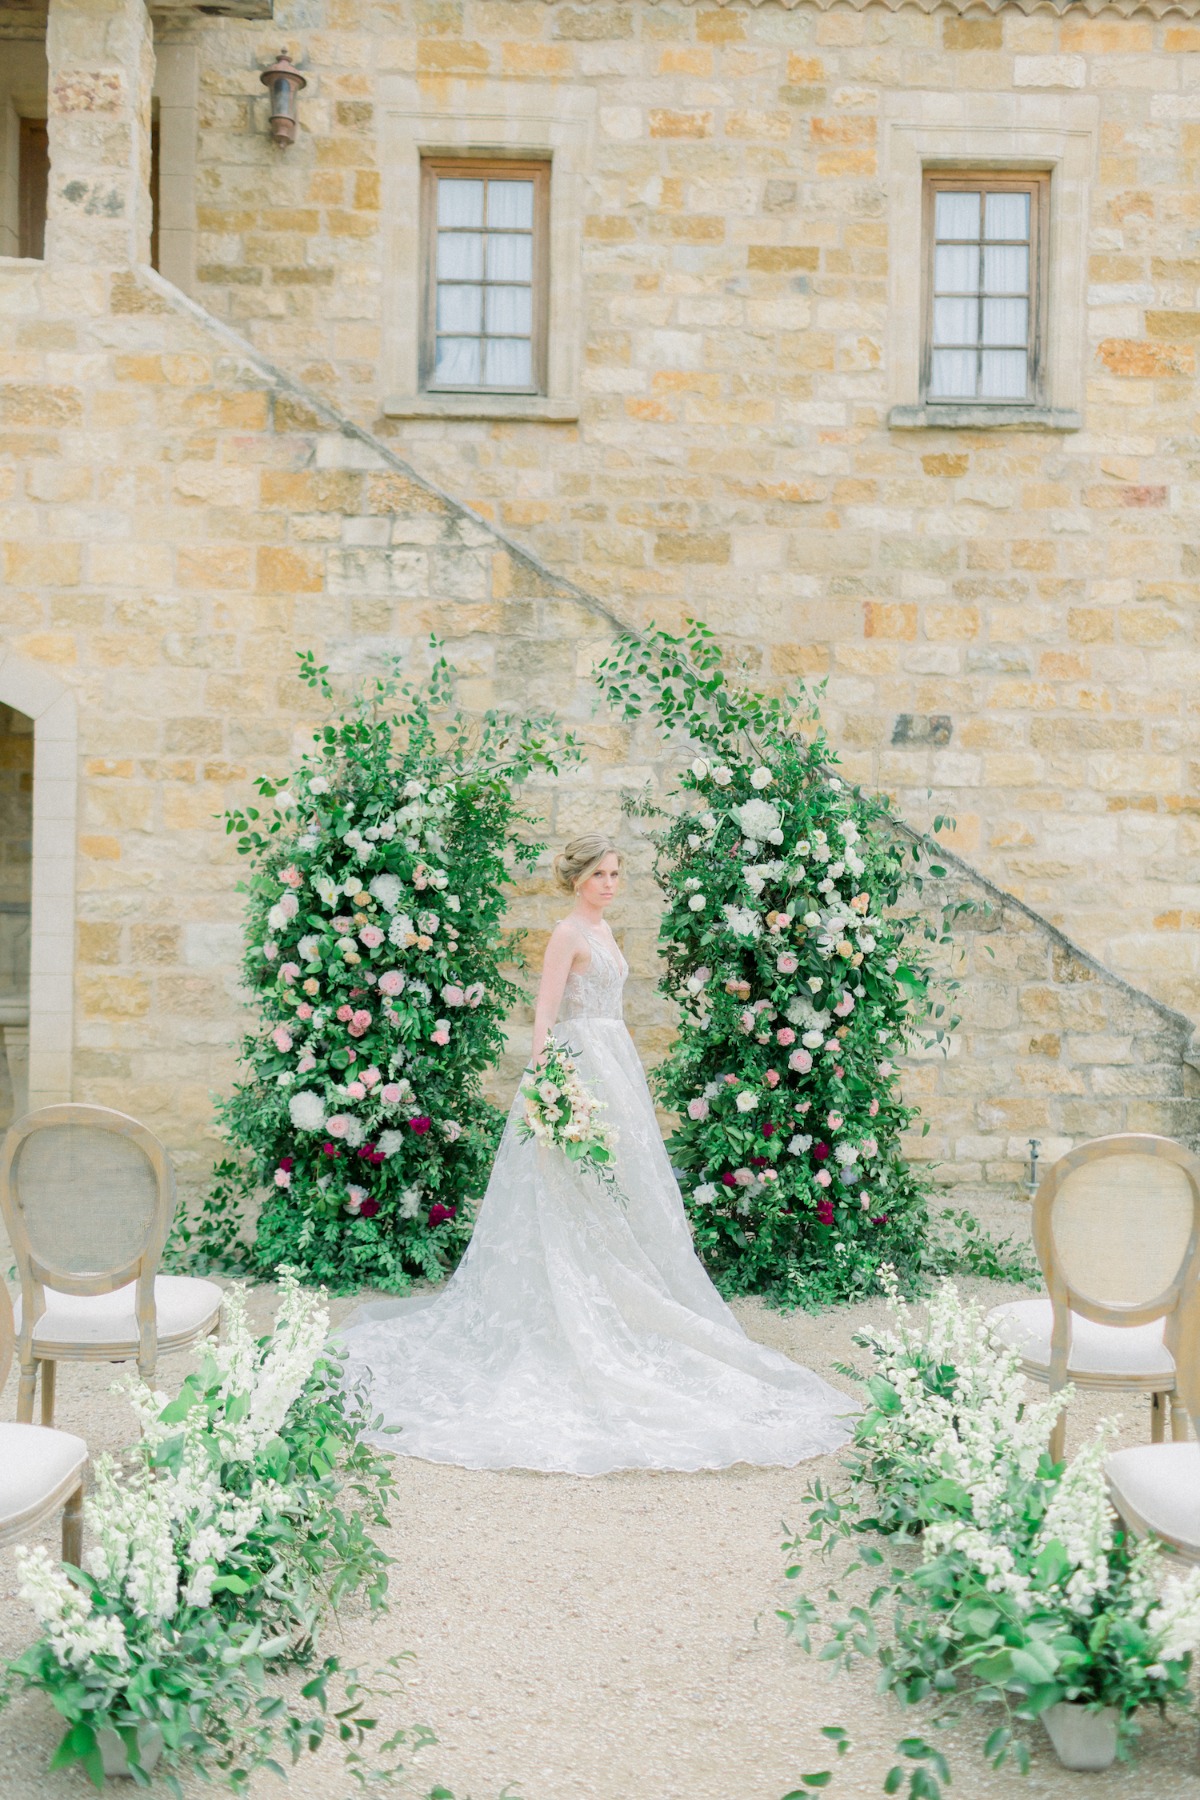 Outdoor rustic wedding ceremony with floral arch